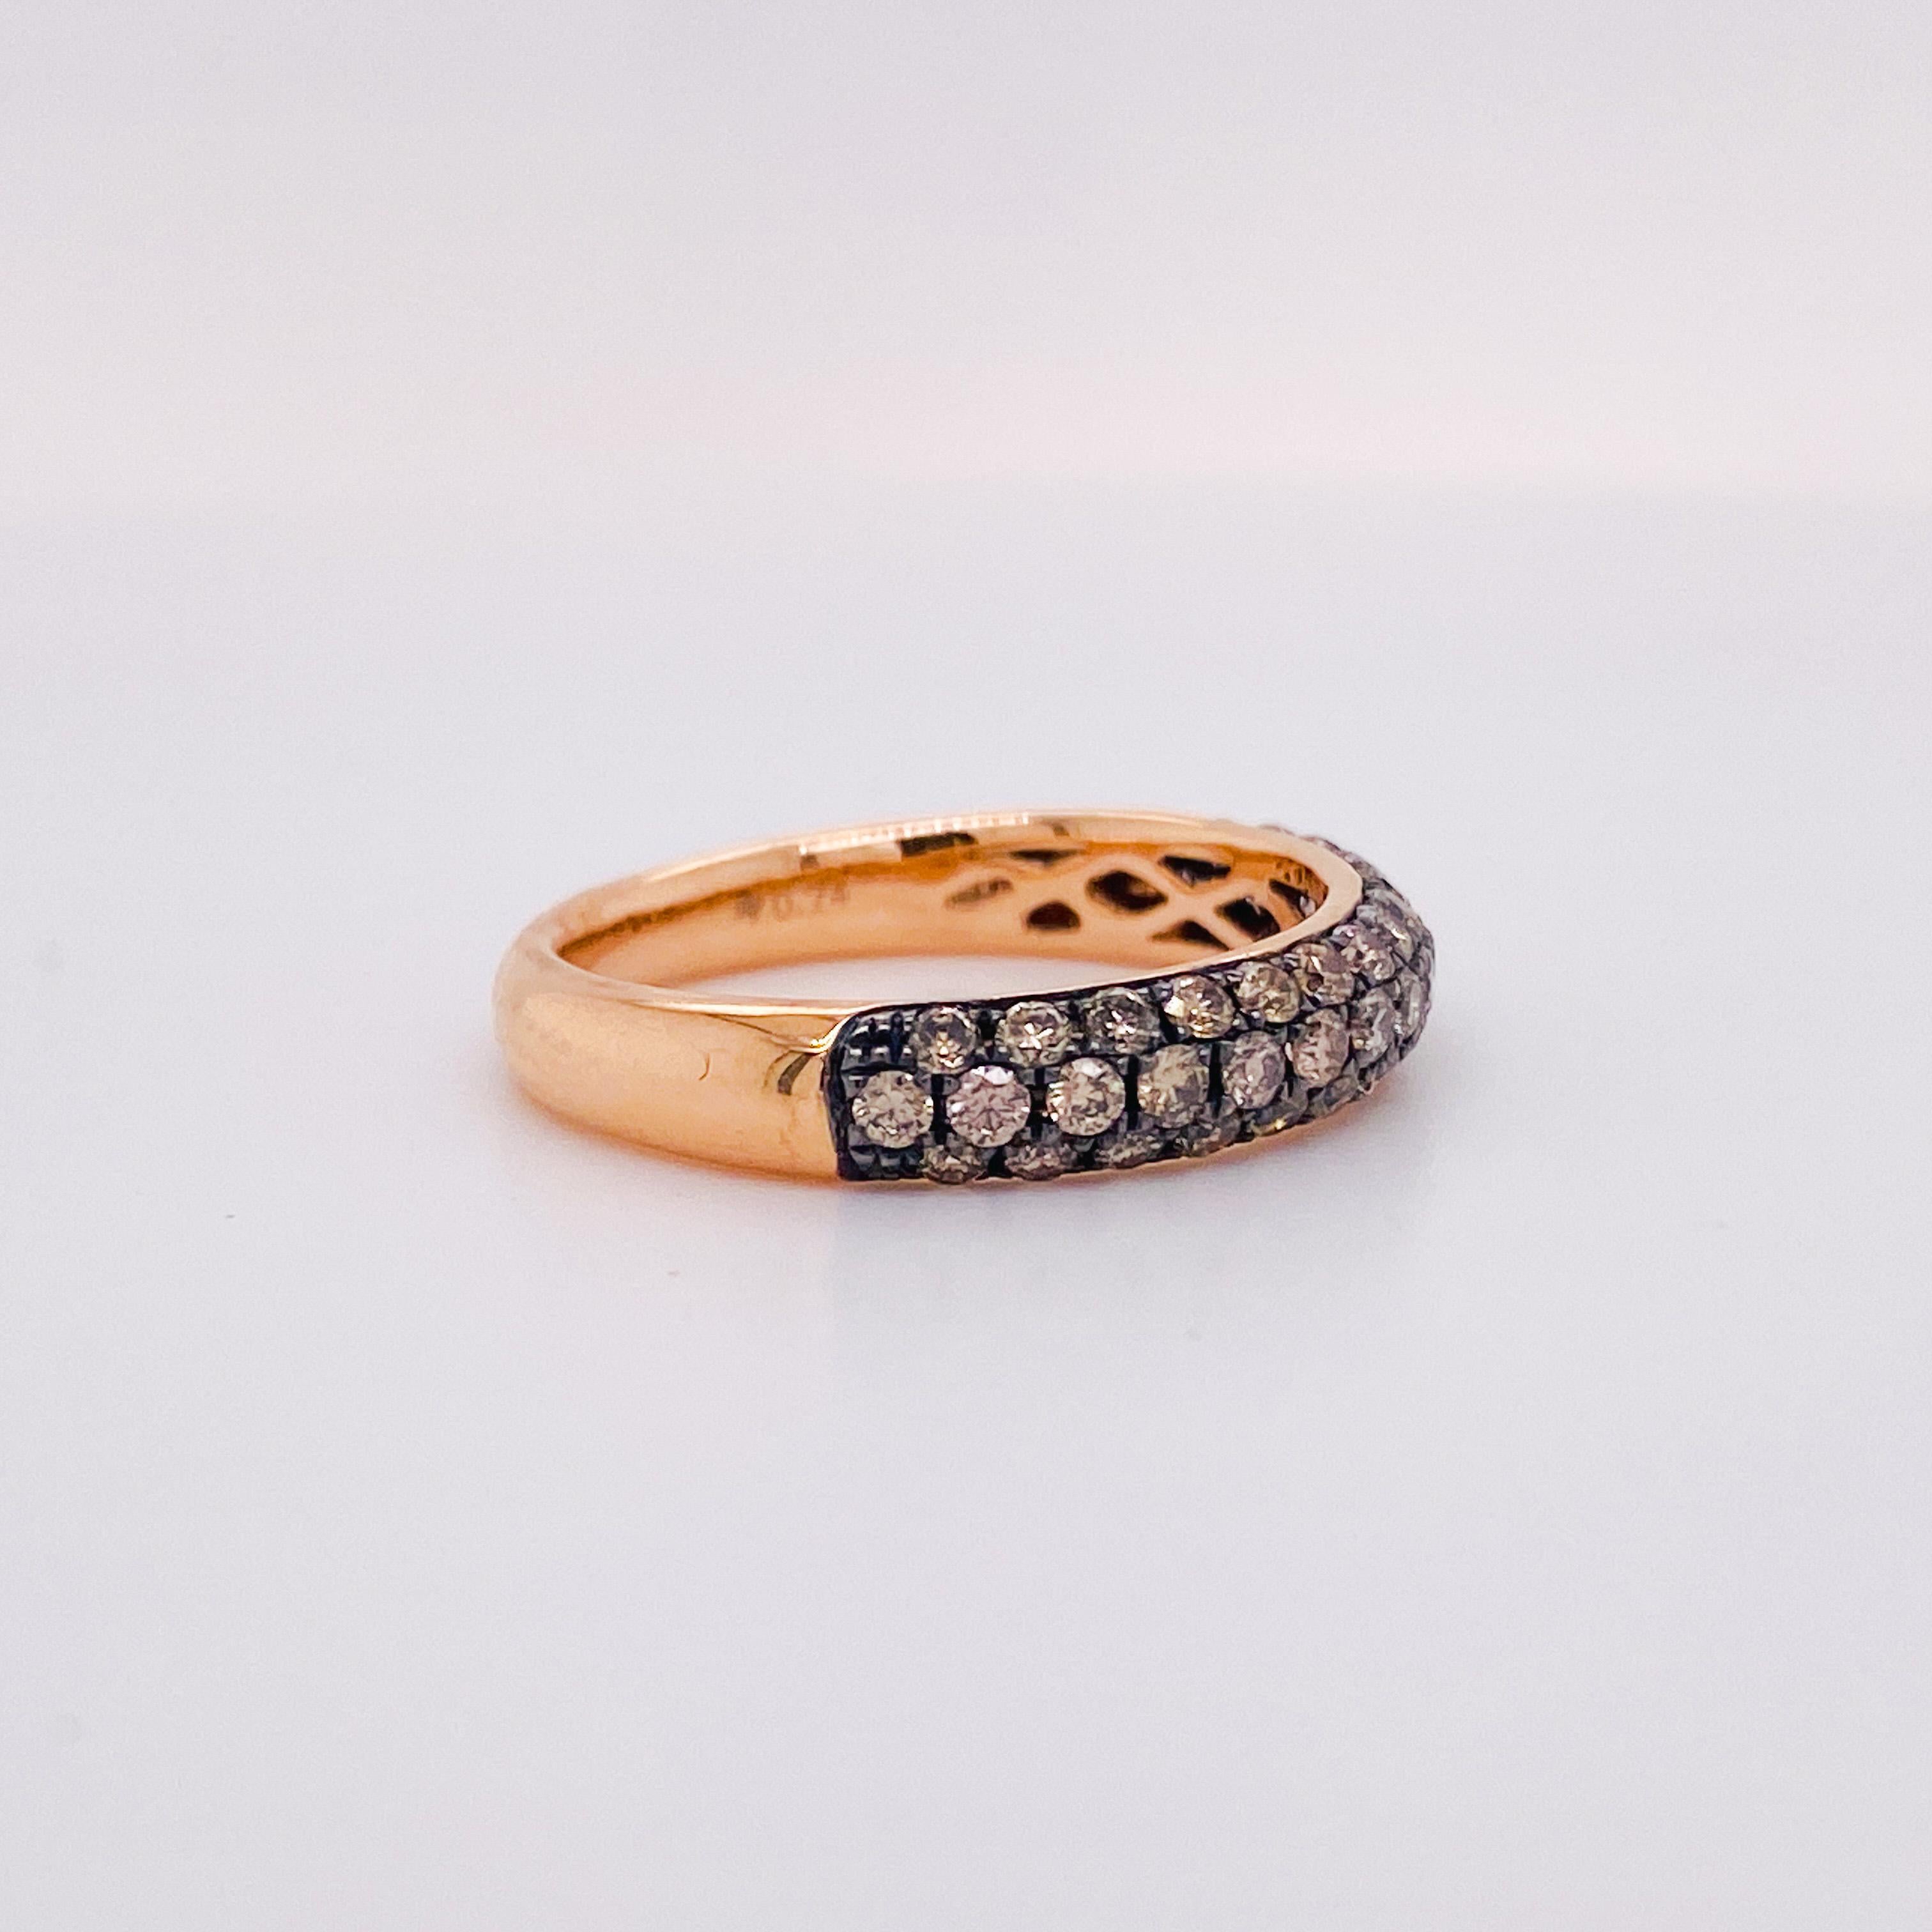 For Sale:  Bombe Champagne Diamond Pave Ring, 3/4 Carats in 14k Rose Gold, Stackable Dome 2